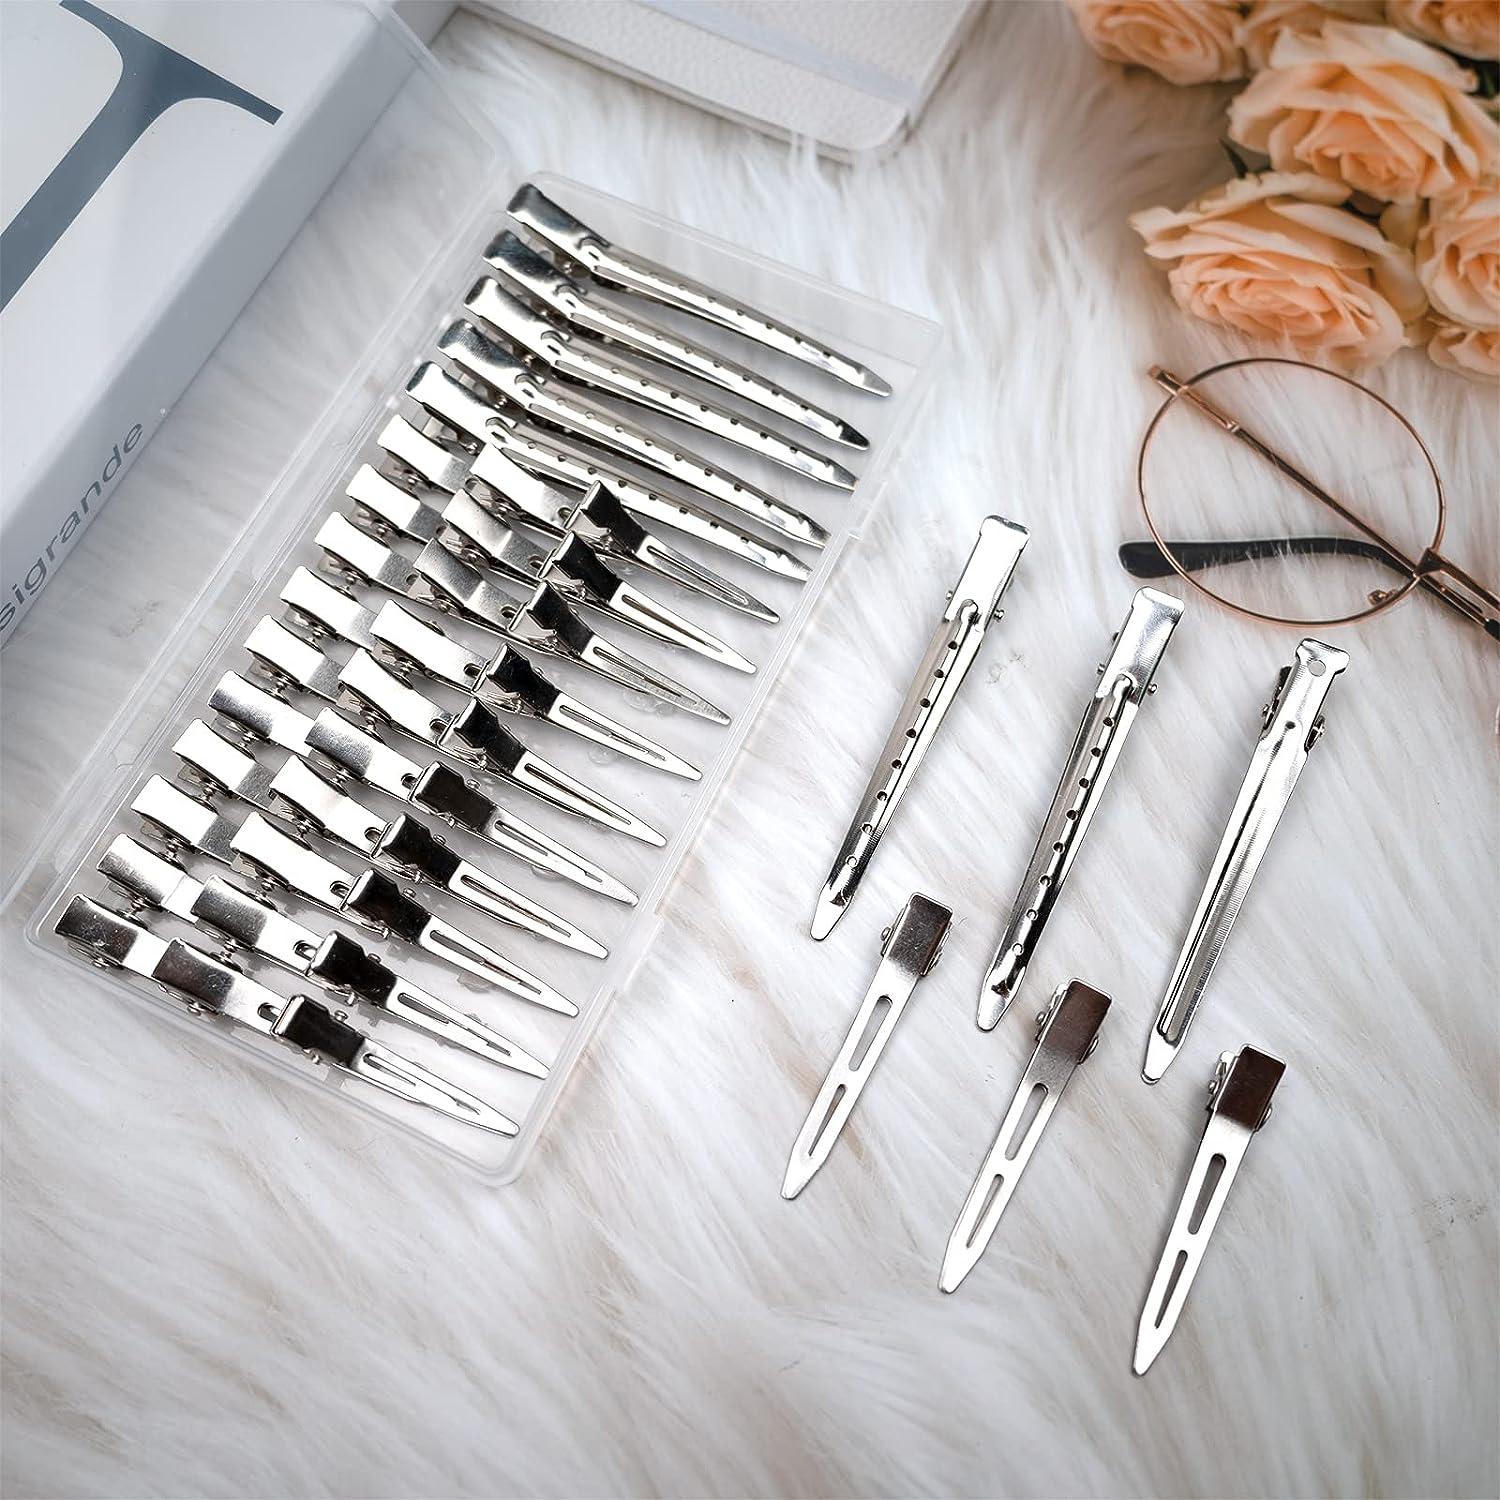  60 Pieces Silver Hair Clips 3 Sizes Silver Single Prong Metal  Duck Bill Hair Clips Silver Alligator Section Clips for Girls Hair Styling  DIY Accessories : Beauty & Personal Care